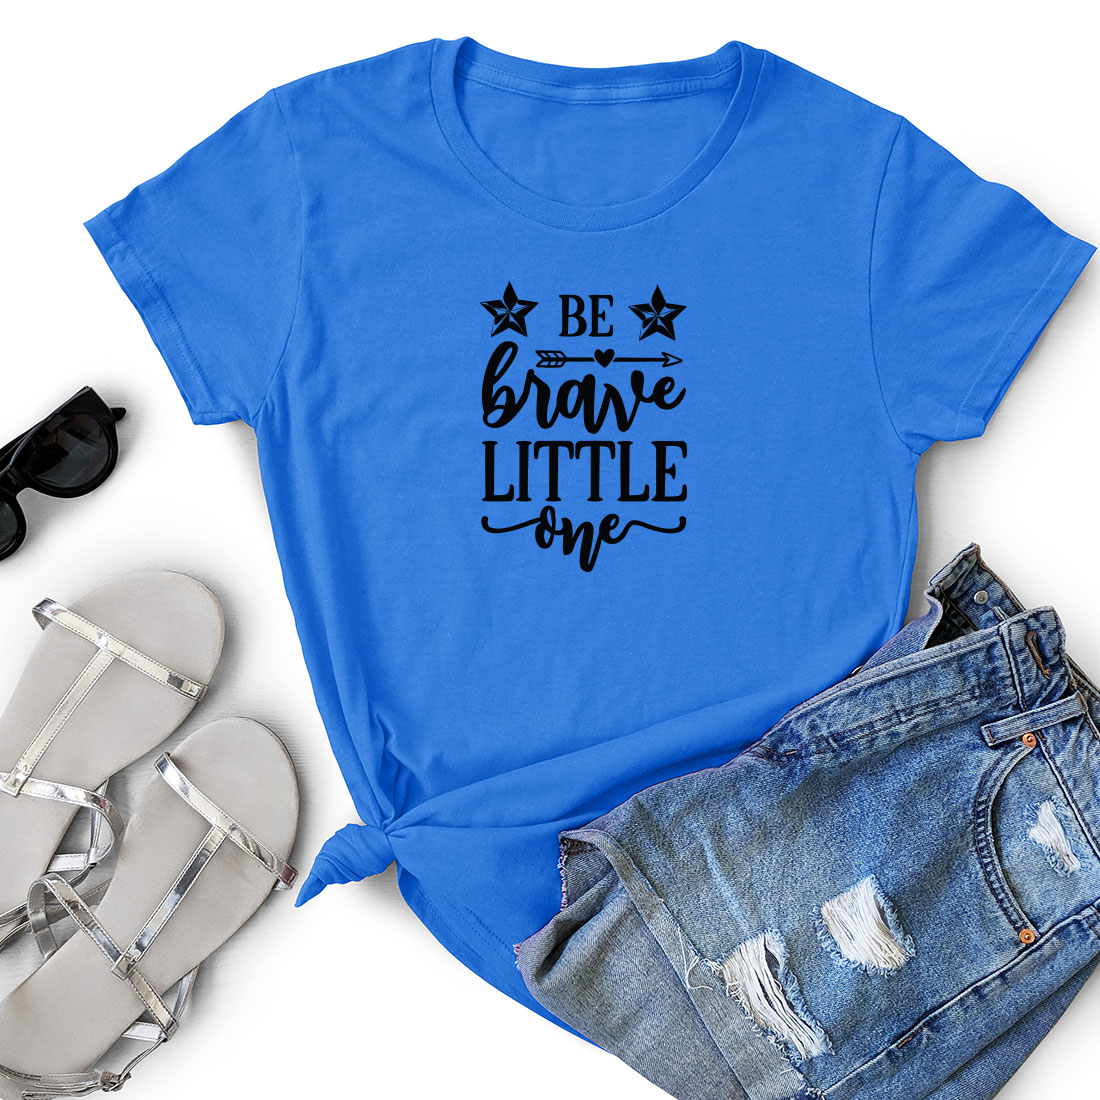 T - shirt that says be brave little one next to a pair of shorts.